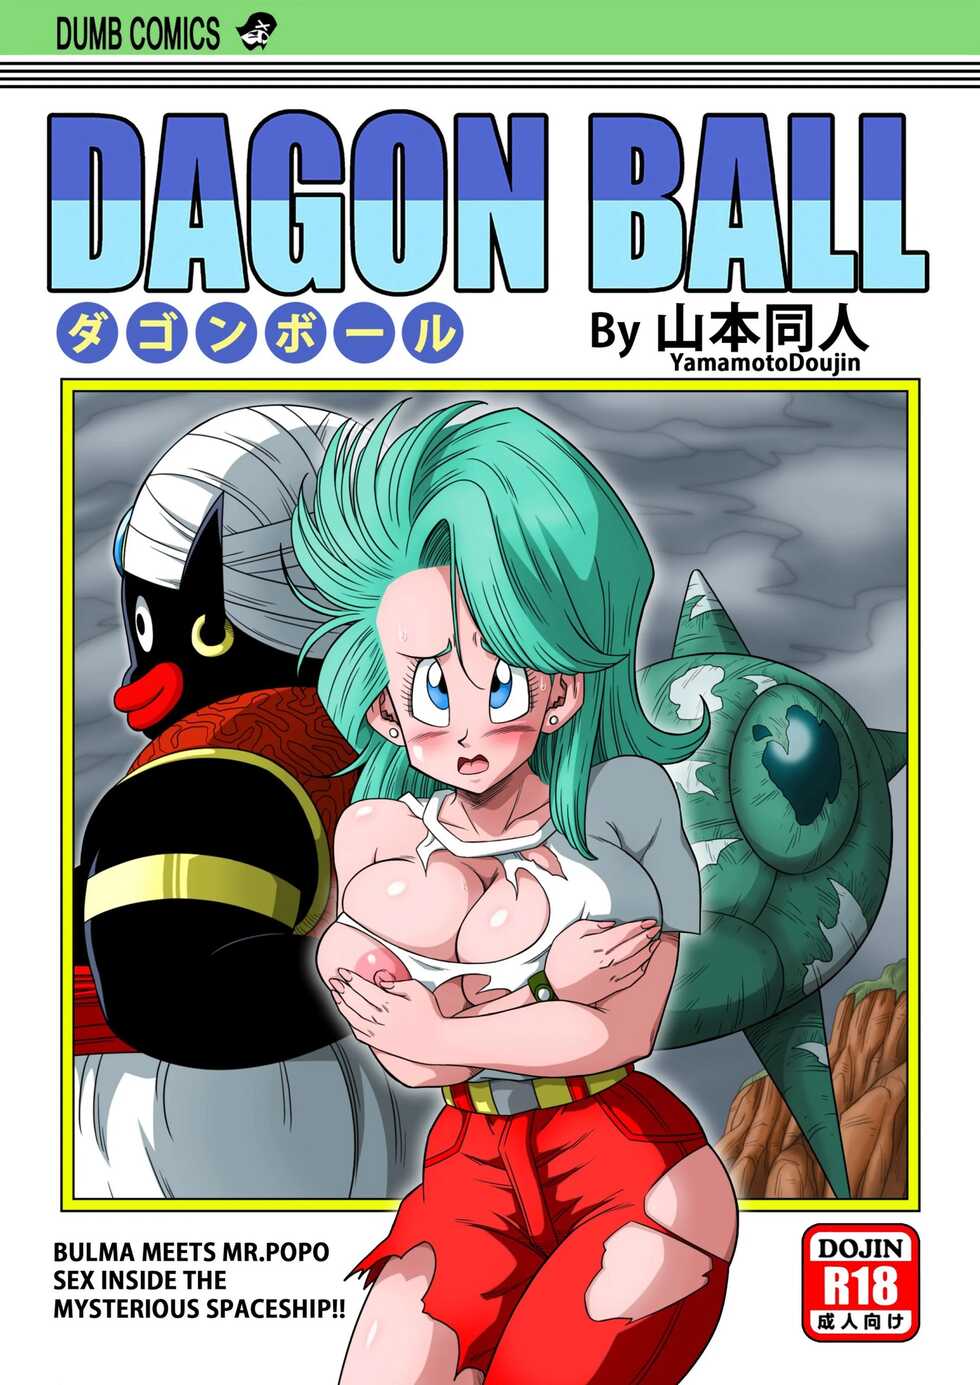 [Yamamoto] Bulma Meets Mr.Popo - Sex inside the Mysterious Spaceship! (Dragon Ball Z) [Uncensored] [FRENCH] [Colorized] - Page 1